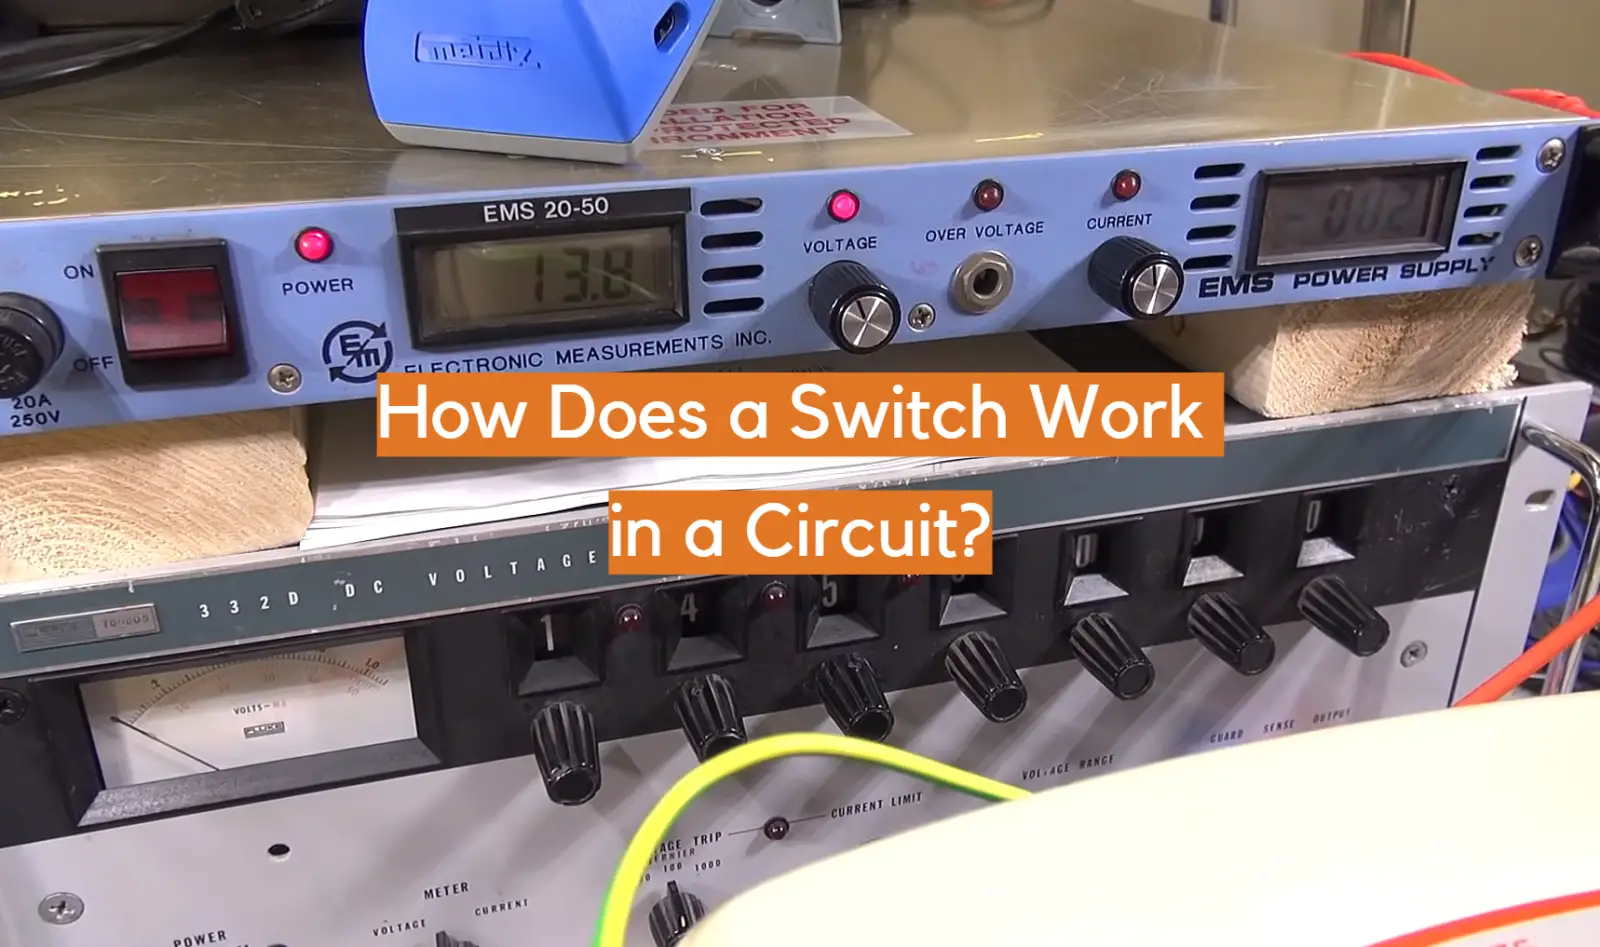 How Does a Switch Work in a Circuit?